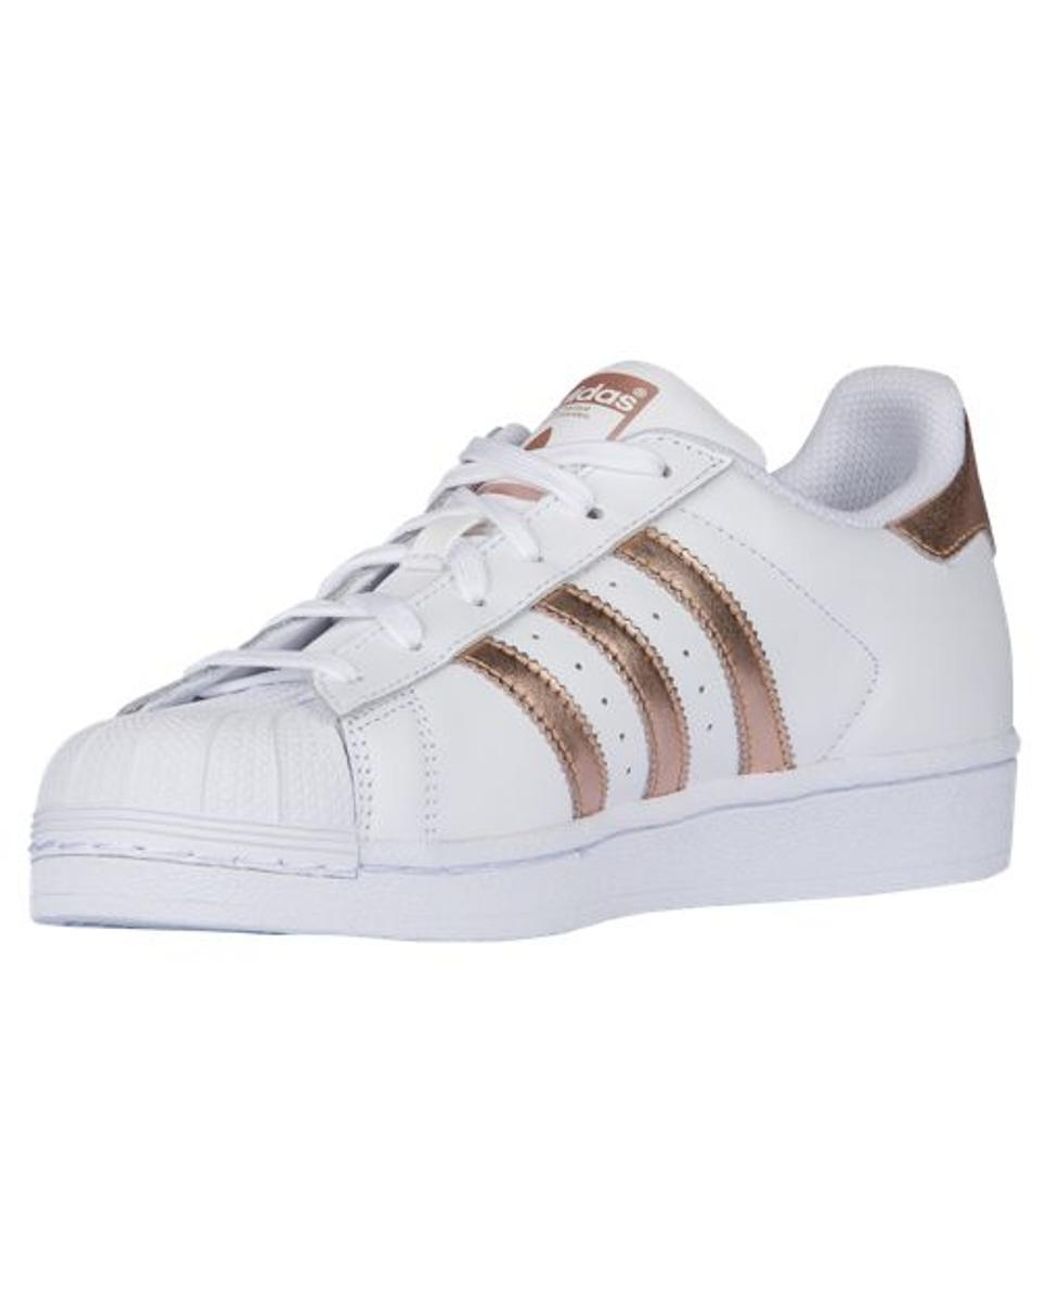 white and gold shell toe adidas cheap 